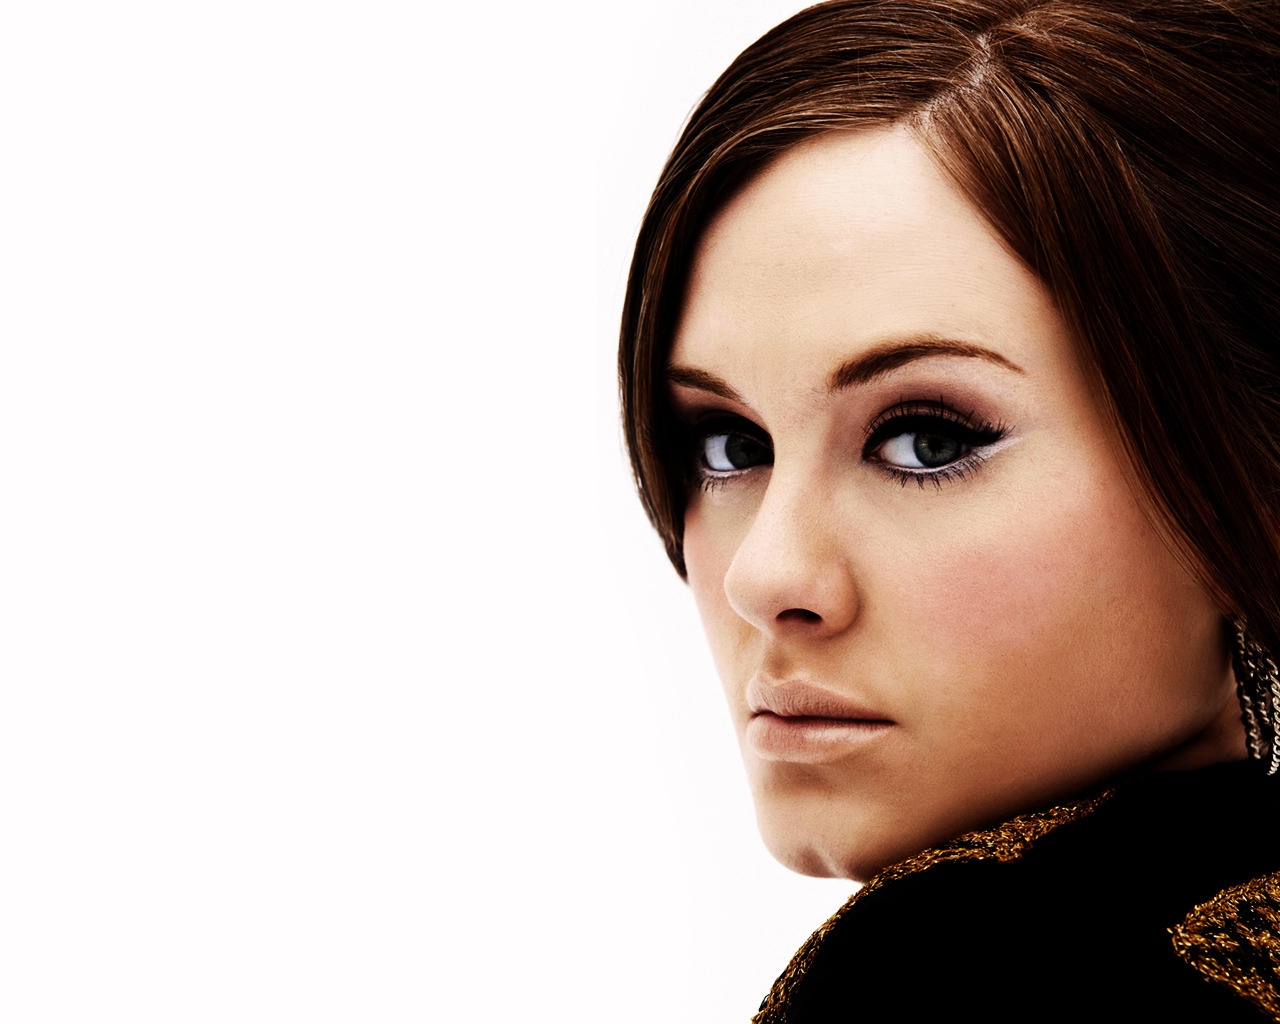 Adele Look for 1280 x 1024 resolution